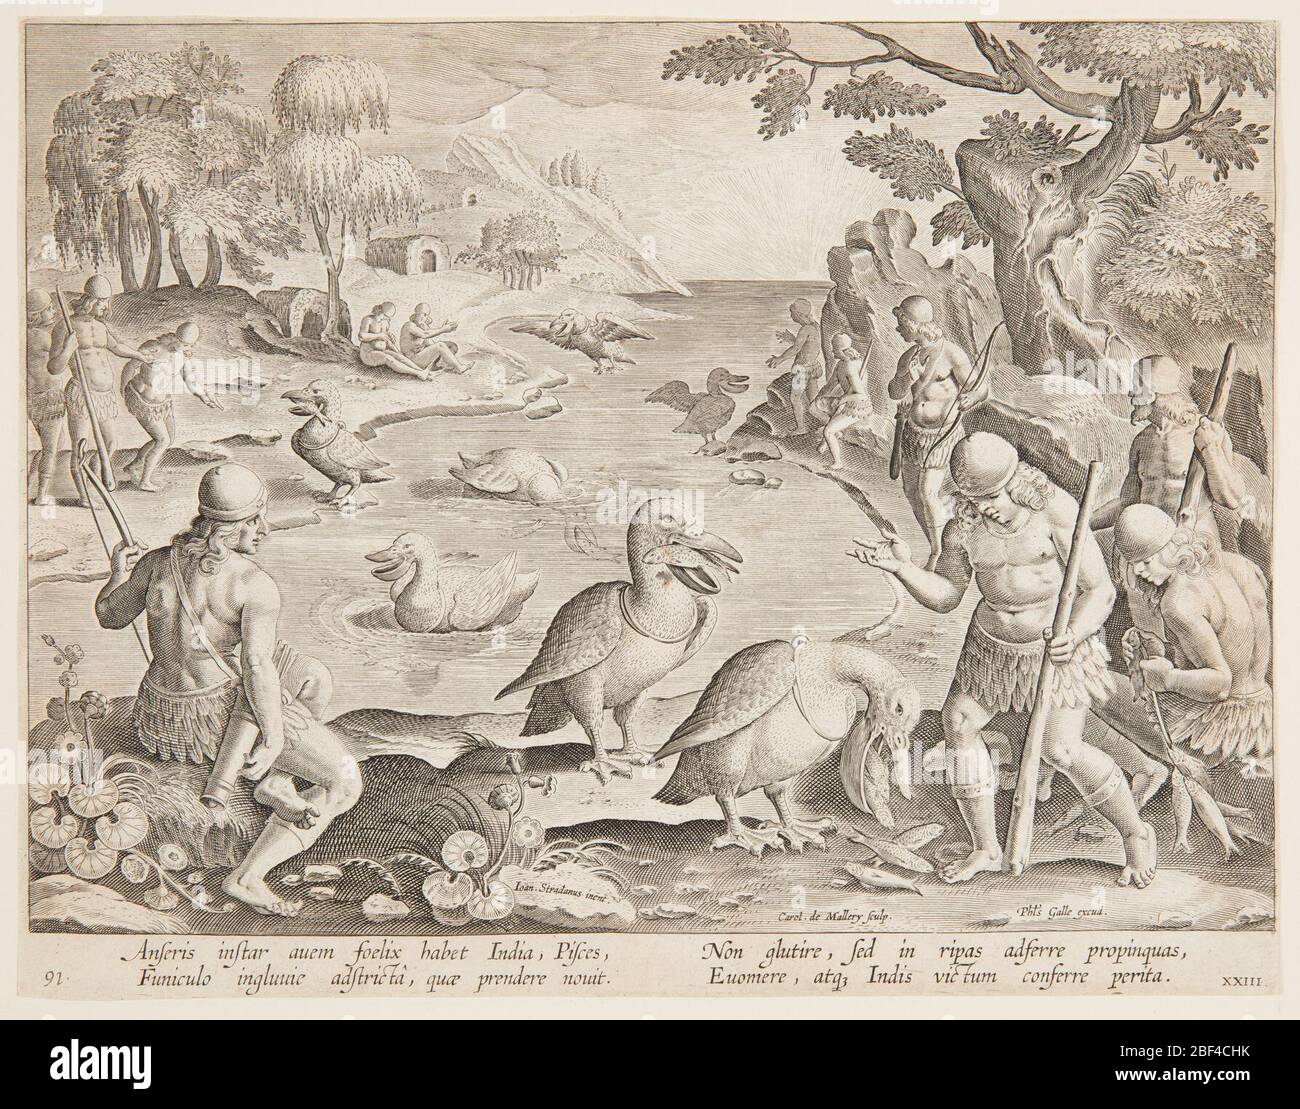 Indians Catching Fish with the Help of Pelicans plate 23 in the Venationes Ferarum Avium Piscium series. Horizontal rectangle. An inlet, with men standing on shore on both sides, watching the pelicans gather fish in their pouches. Each bird bears a ring about its throat to prevent it from swallowing its catch. Stock Photo